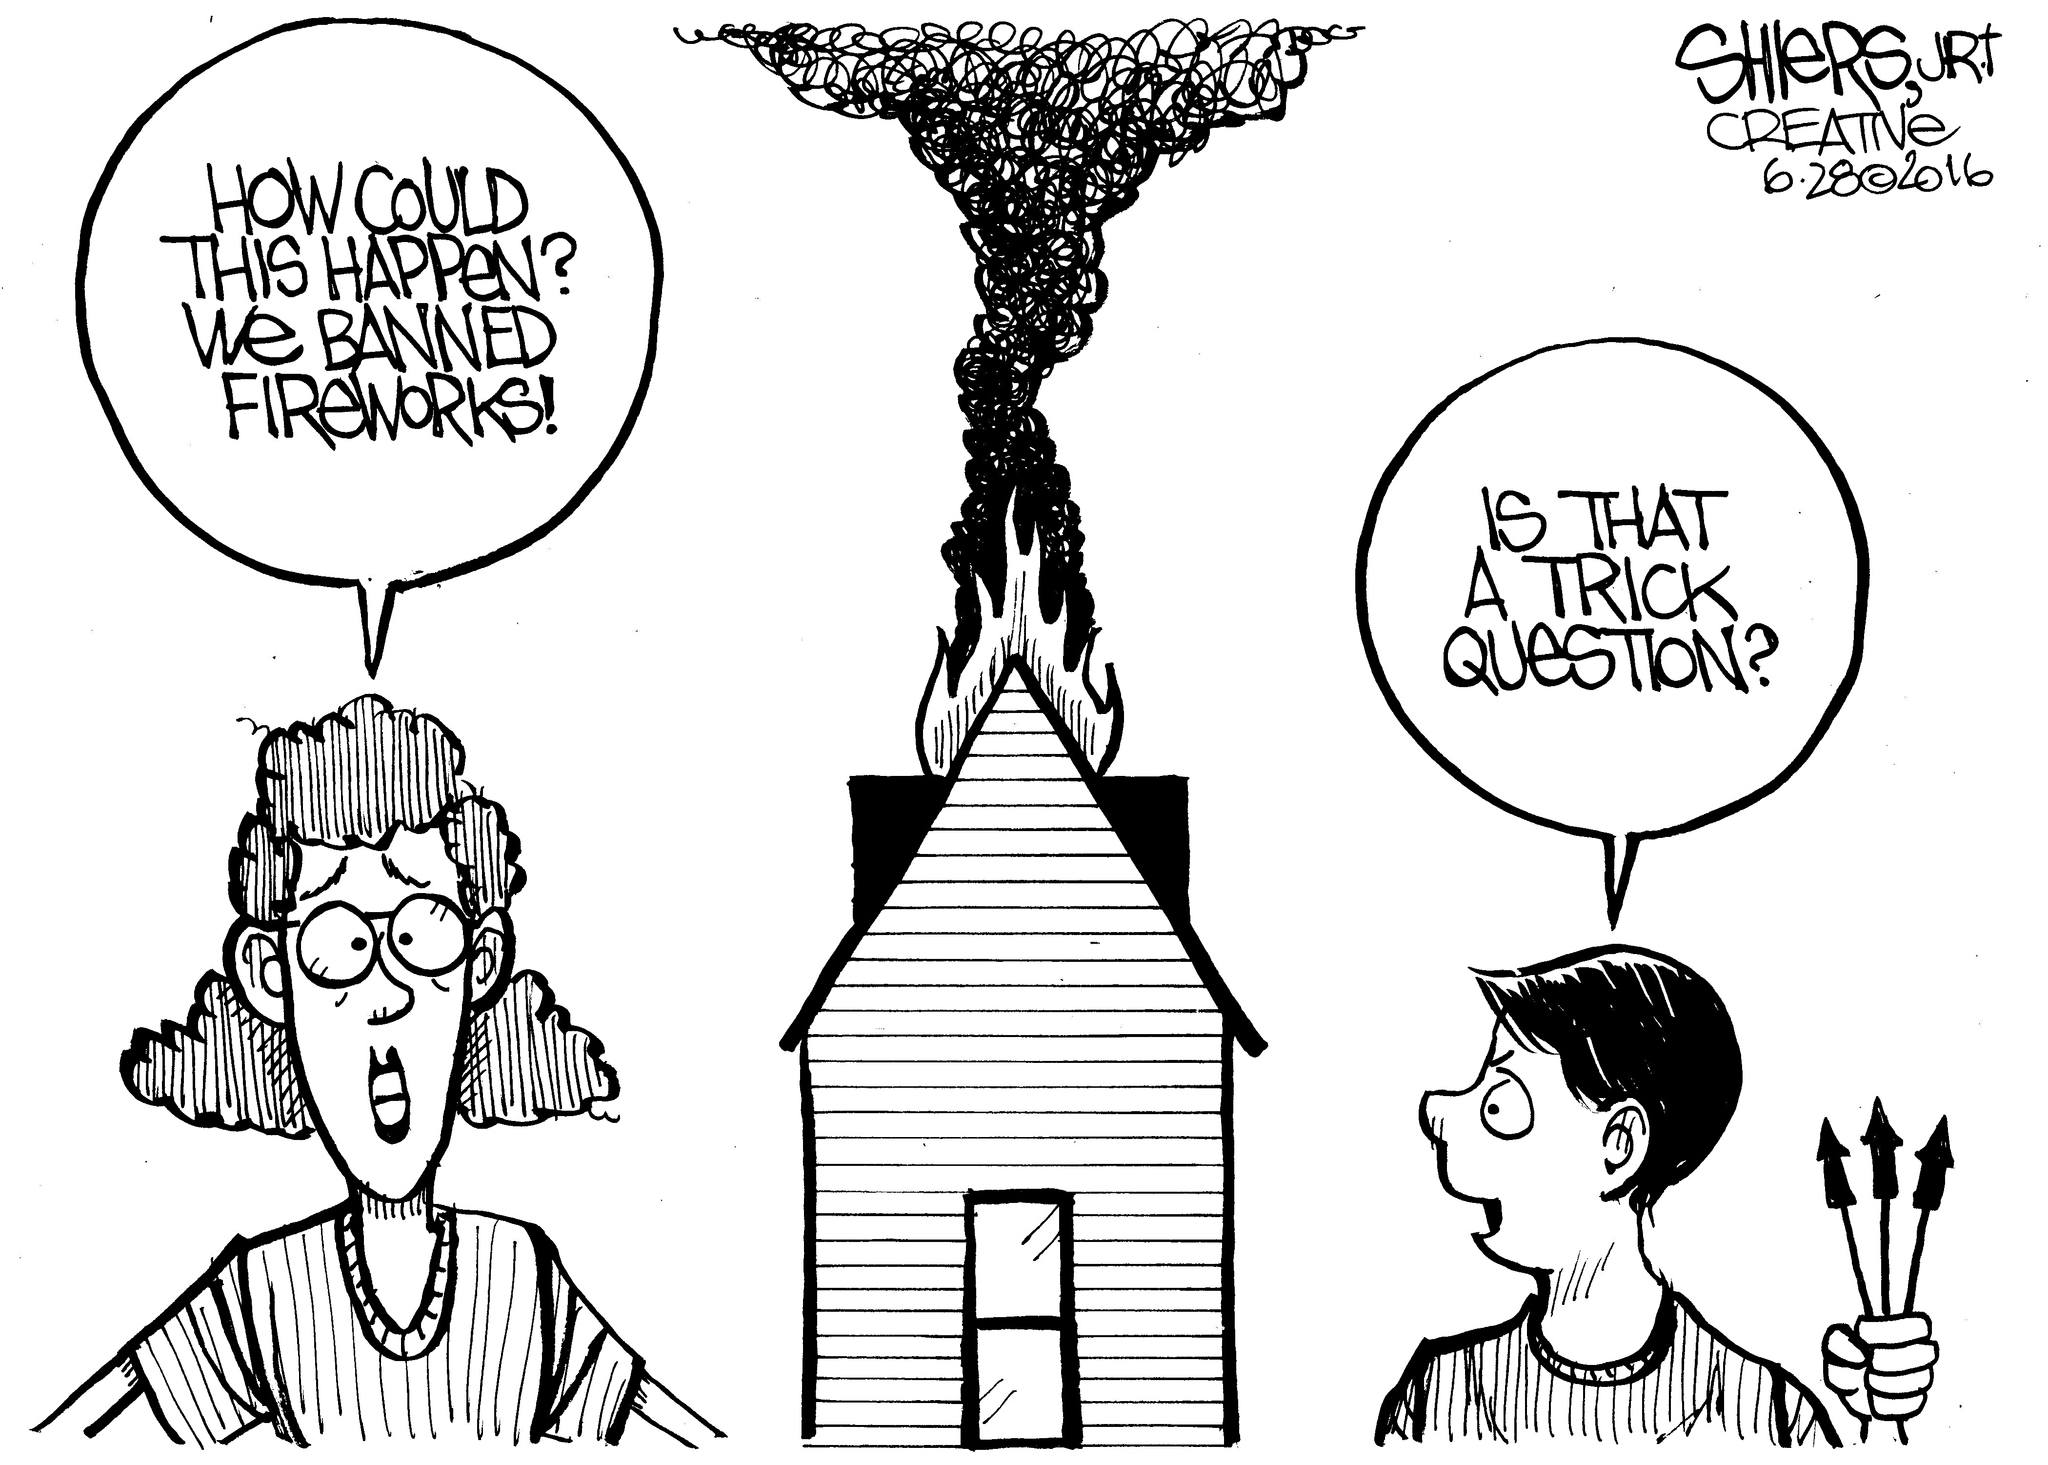 Is that a trick question? | Cartoon